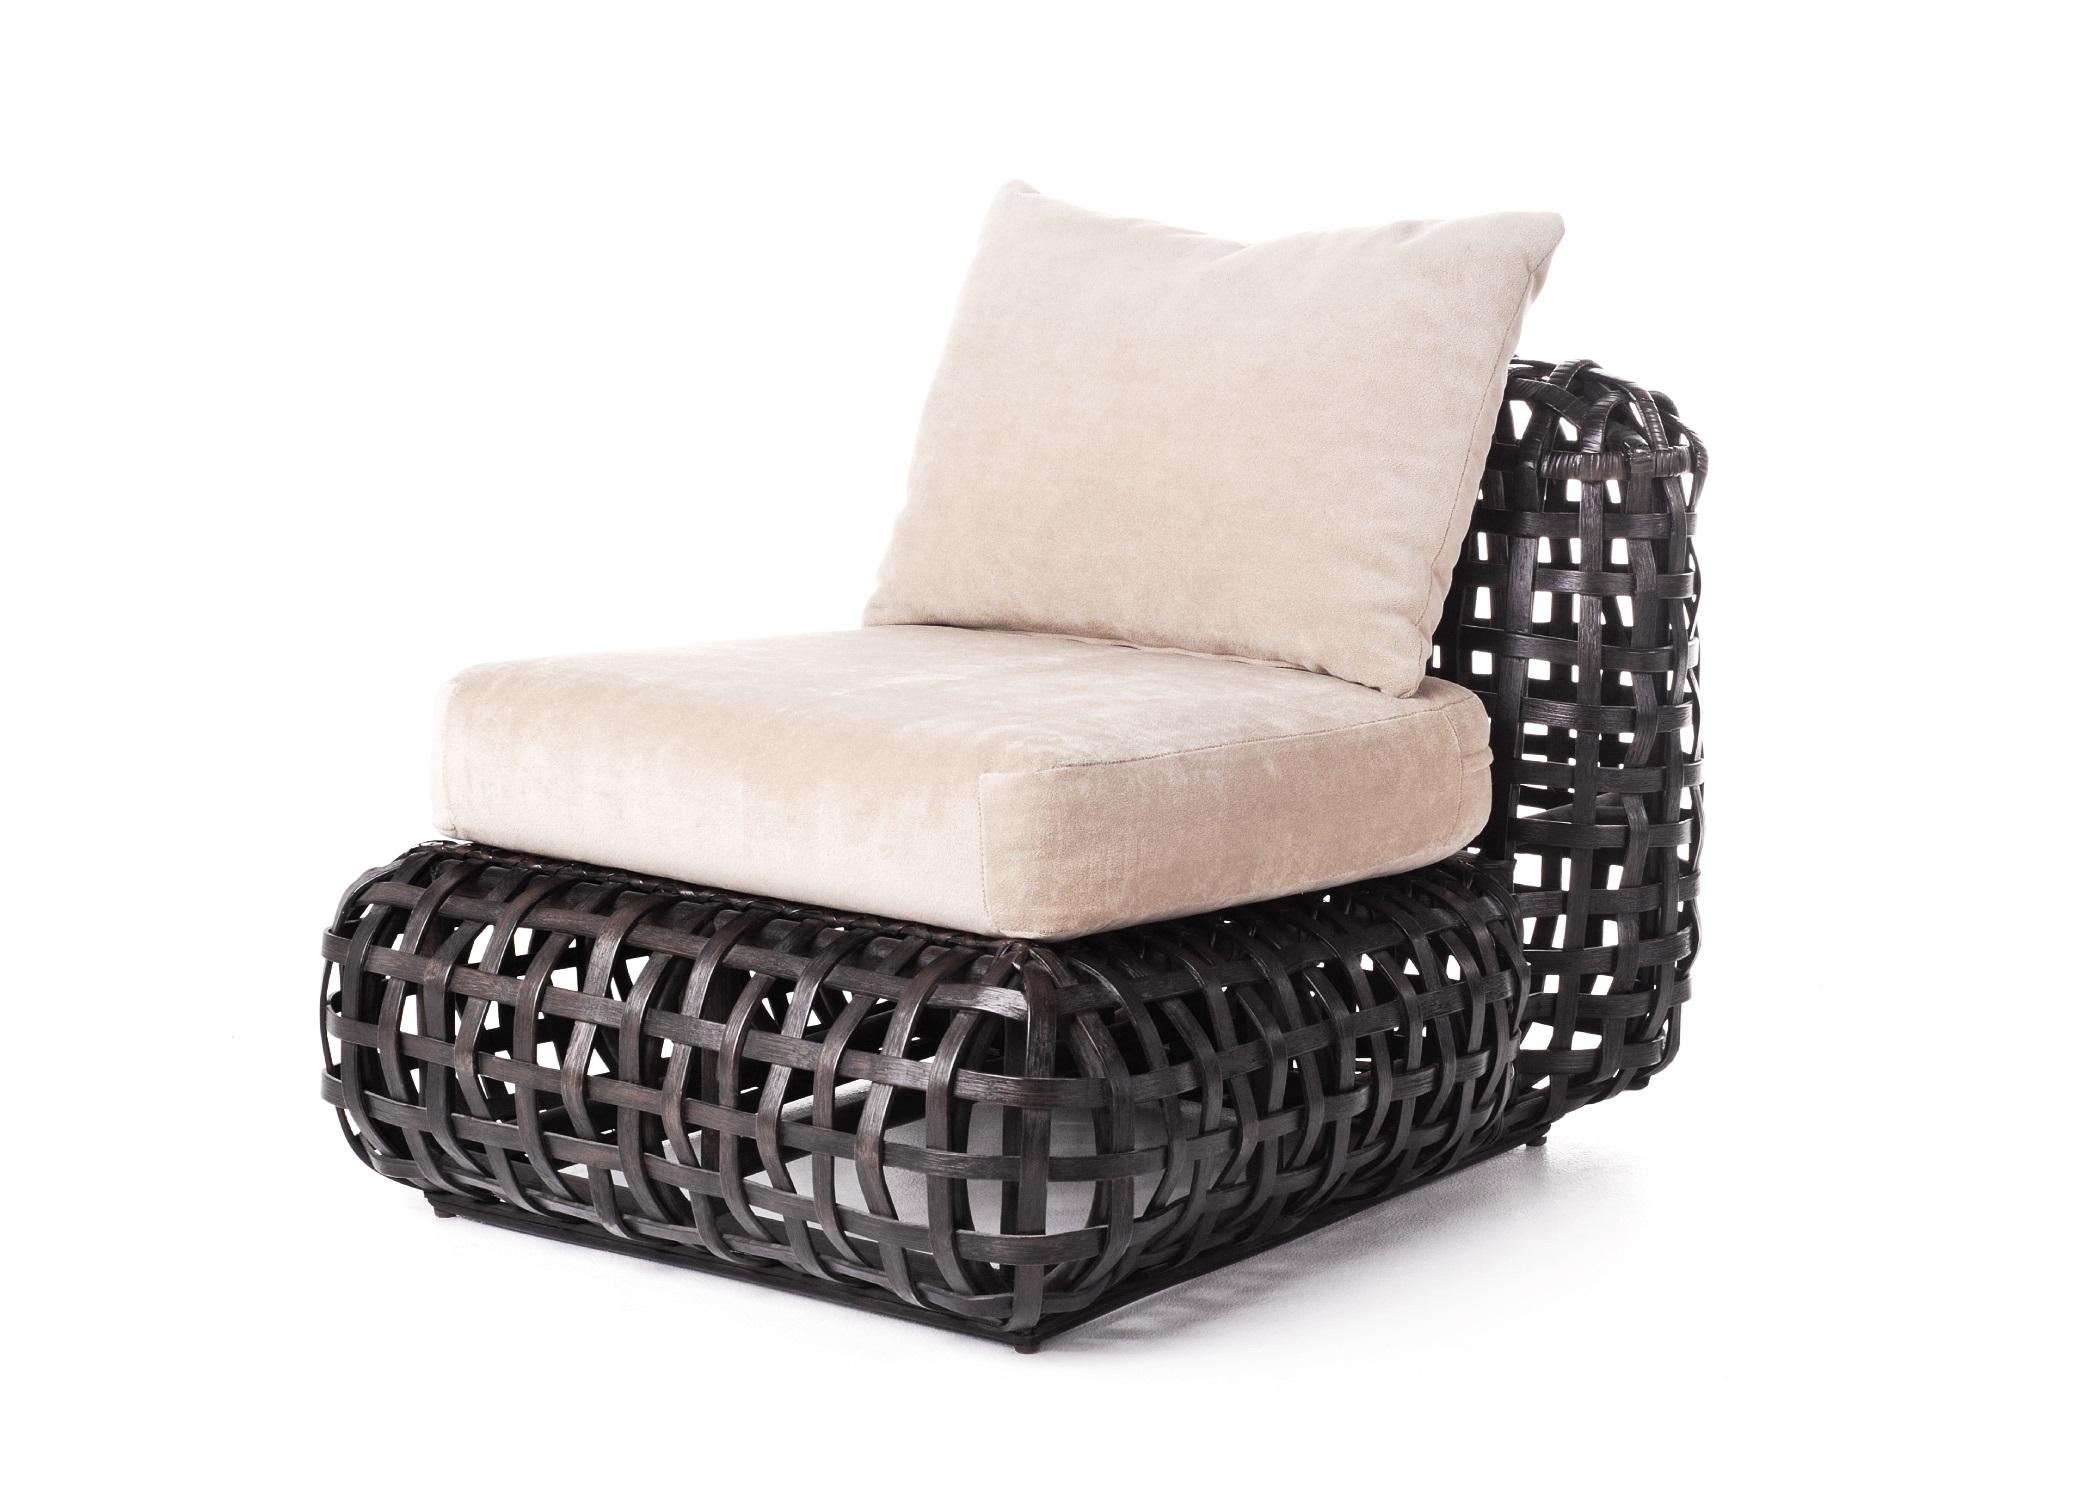 Outdoor matilda easy chair by Kenneth Cobonpue.
Materials: Polyethelene. Aluminum.
Also available in other colors and for indoors. 
Dimensions: 100cm x 81cm x H 63cm.

The same principle of a woven basket is used in making Matilda. This vast